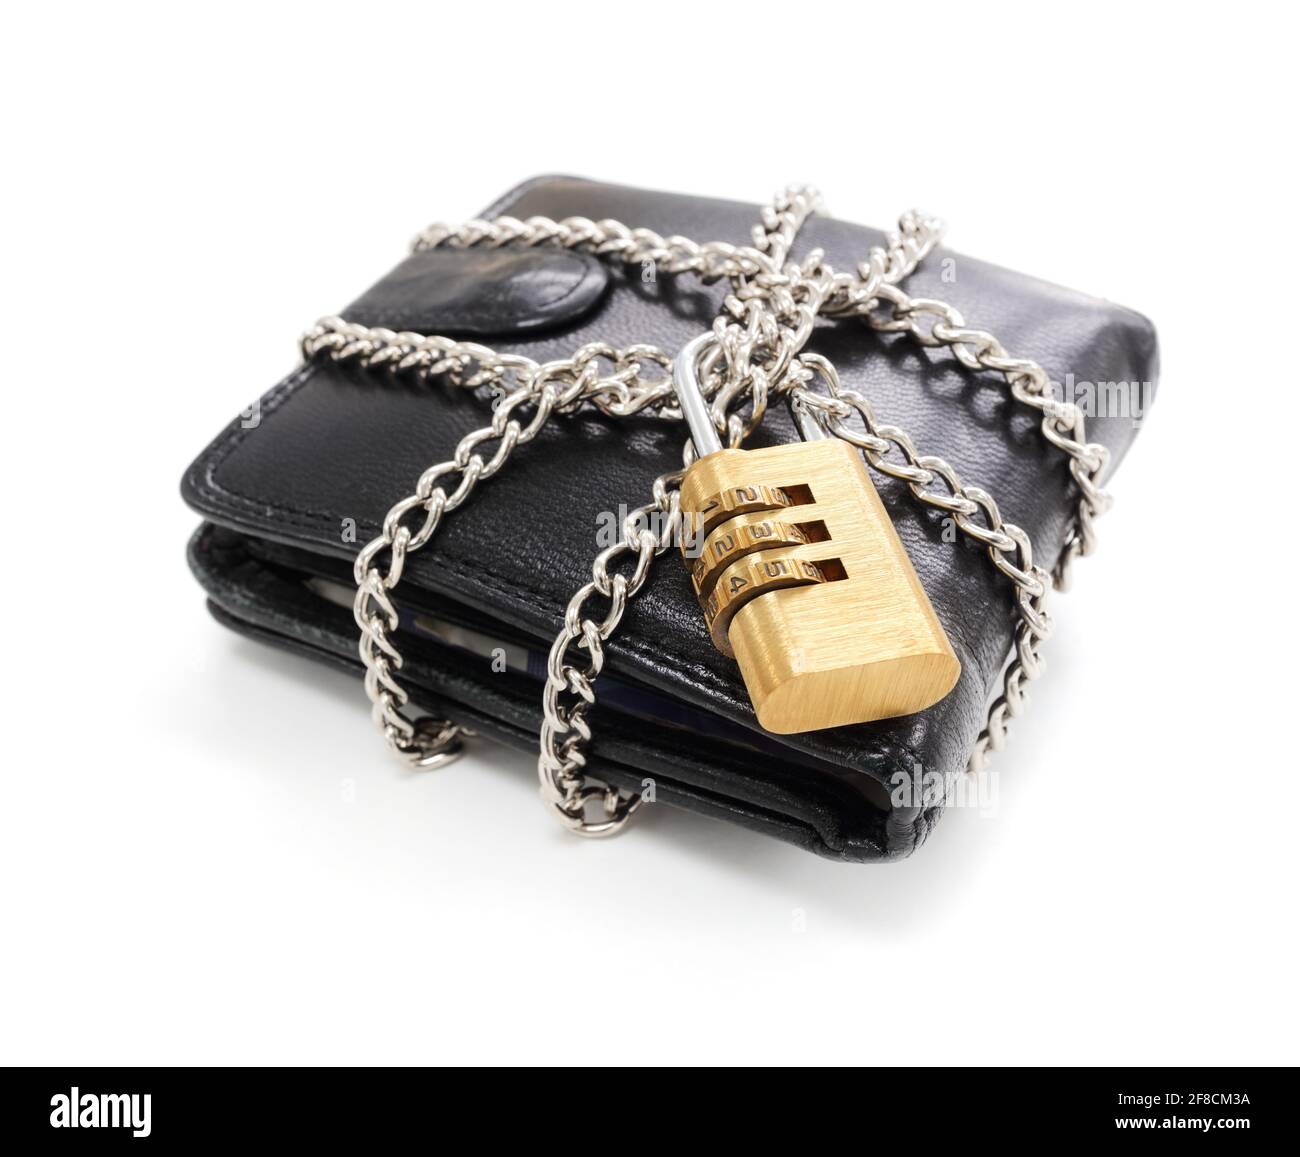 wallet and money data security concept lock and chain Stock Photo